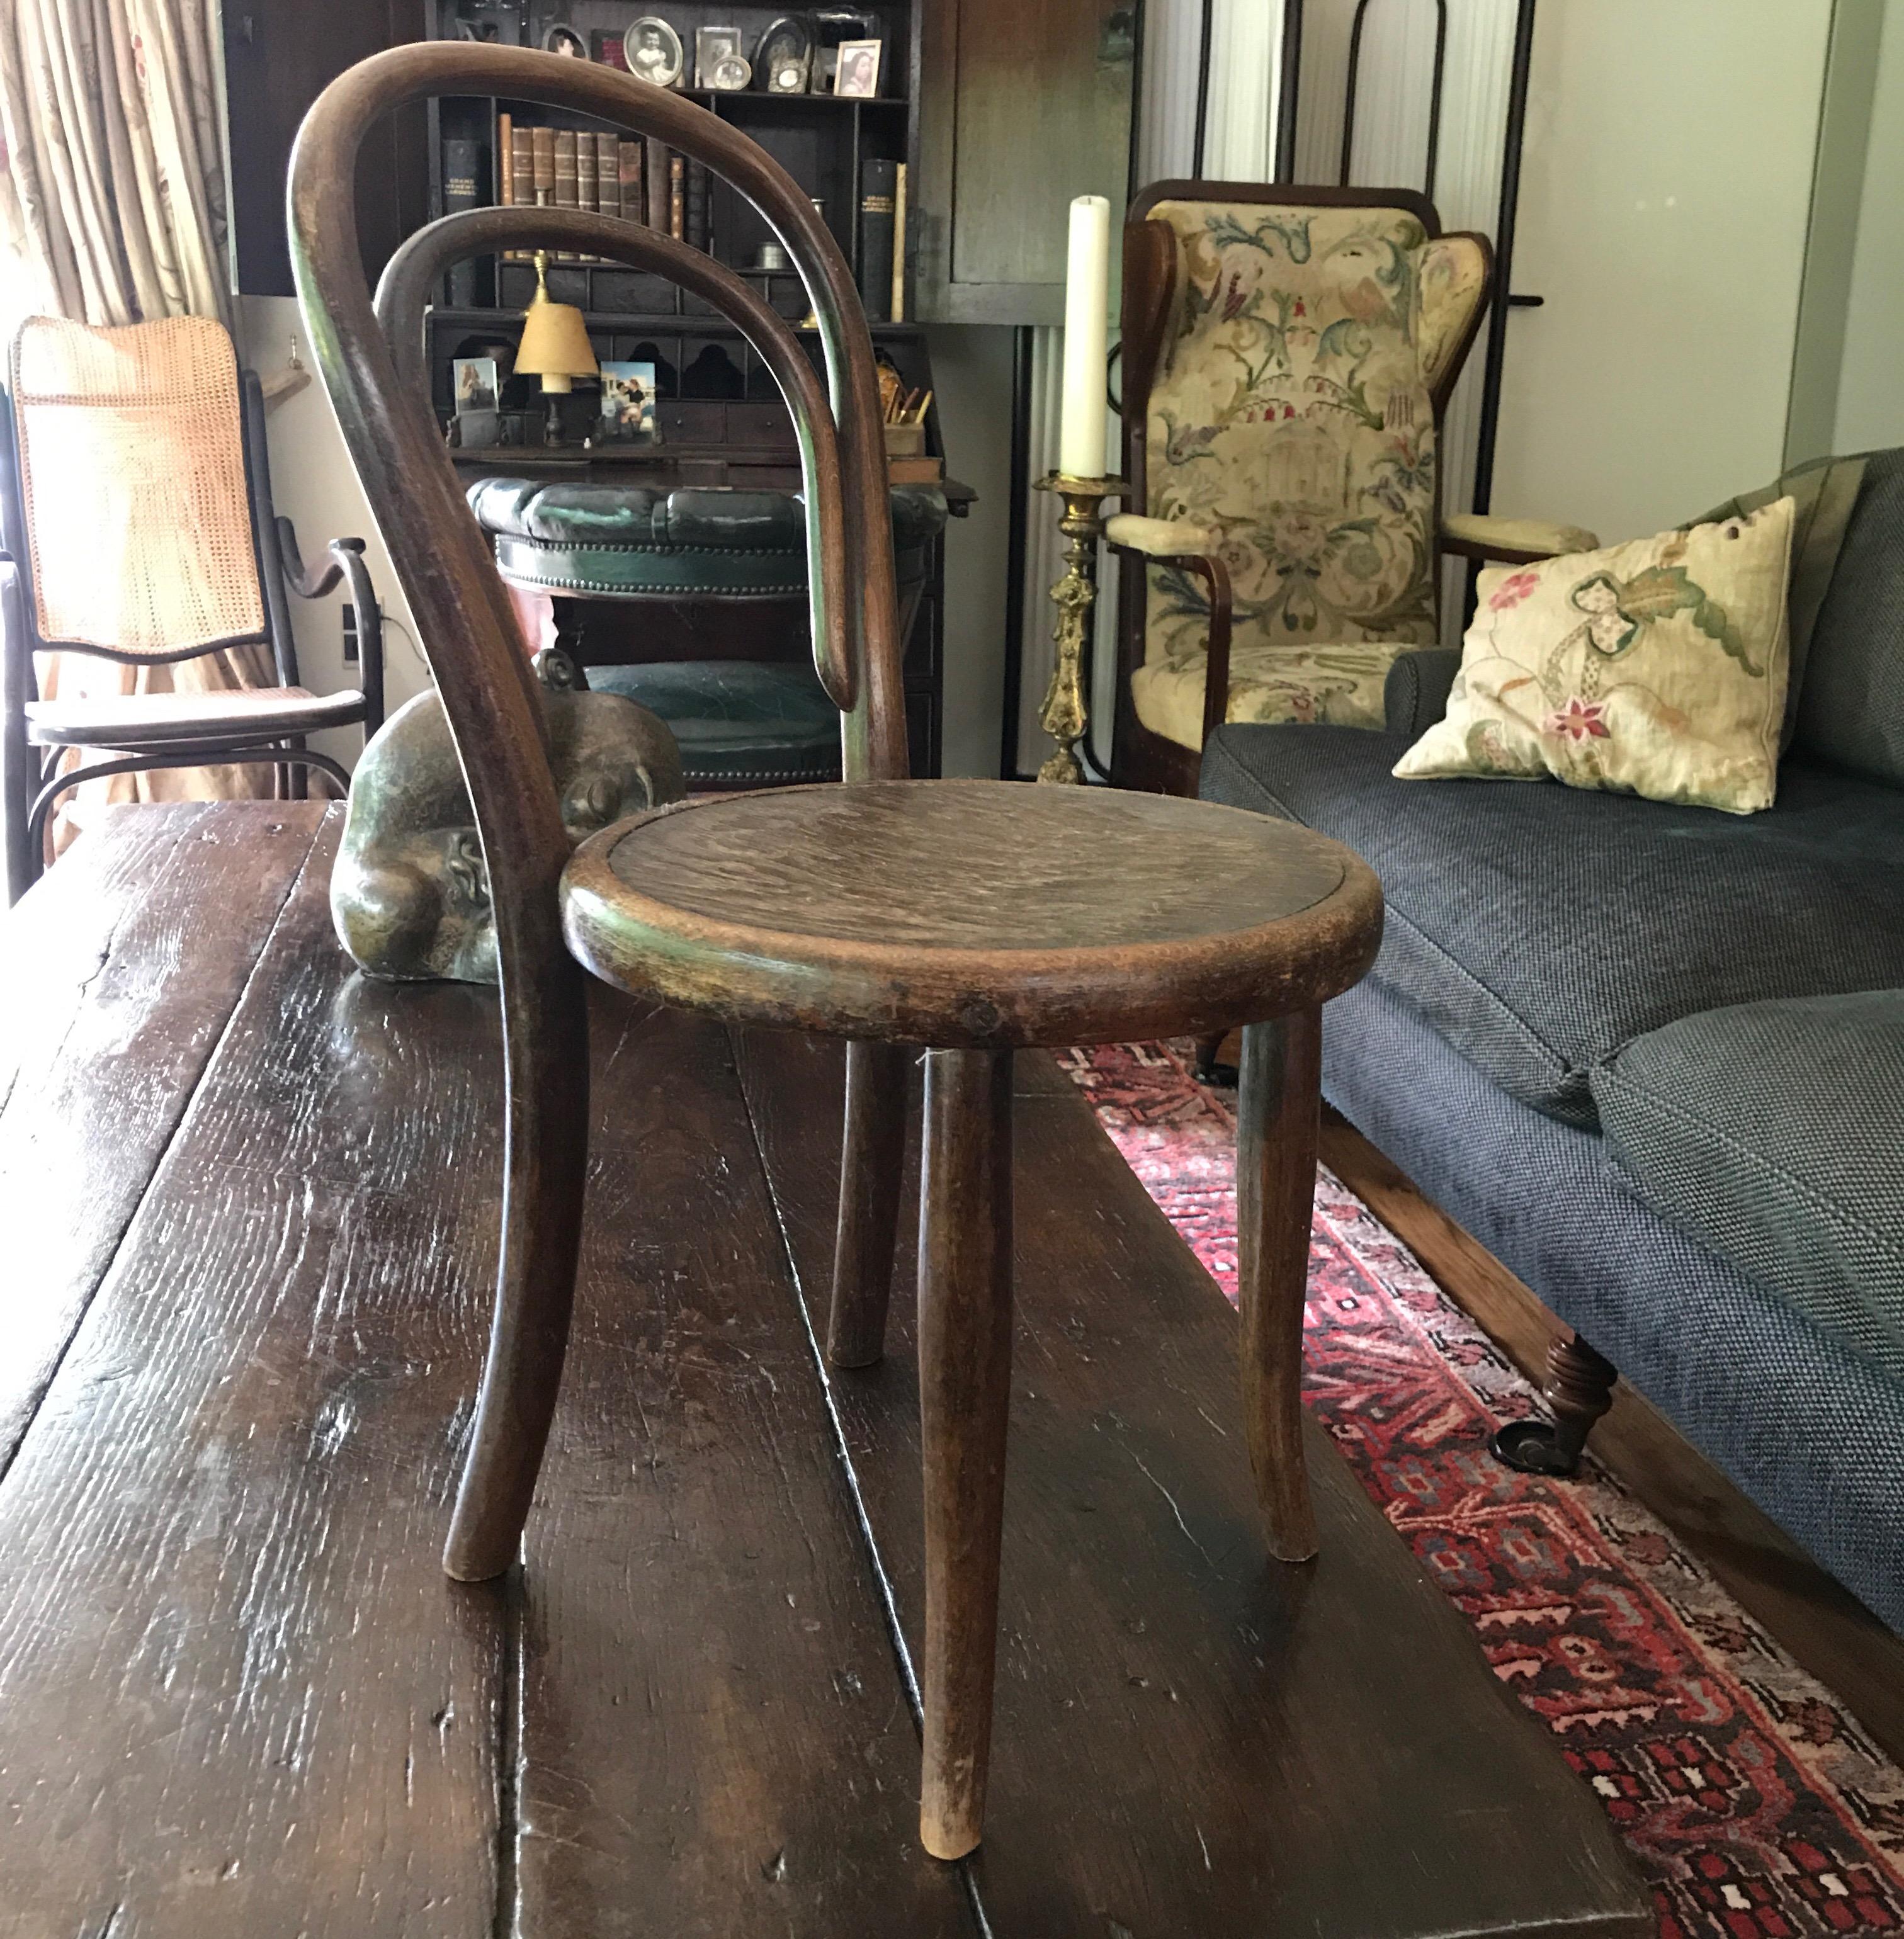 Thonet collectors item
Stamped and labeled by Thonet
circa 1880
Fix plywood seating original.